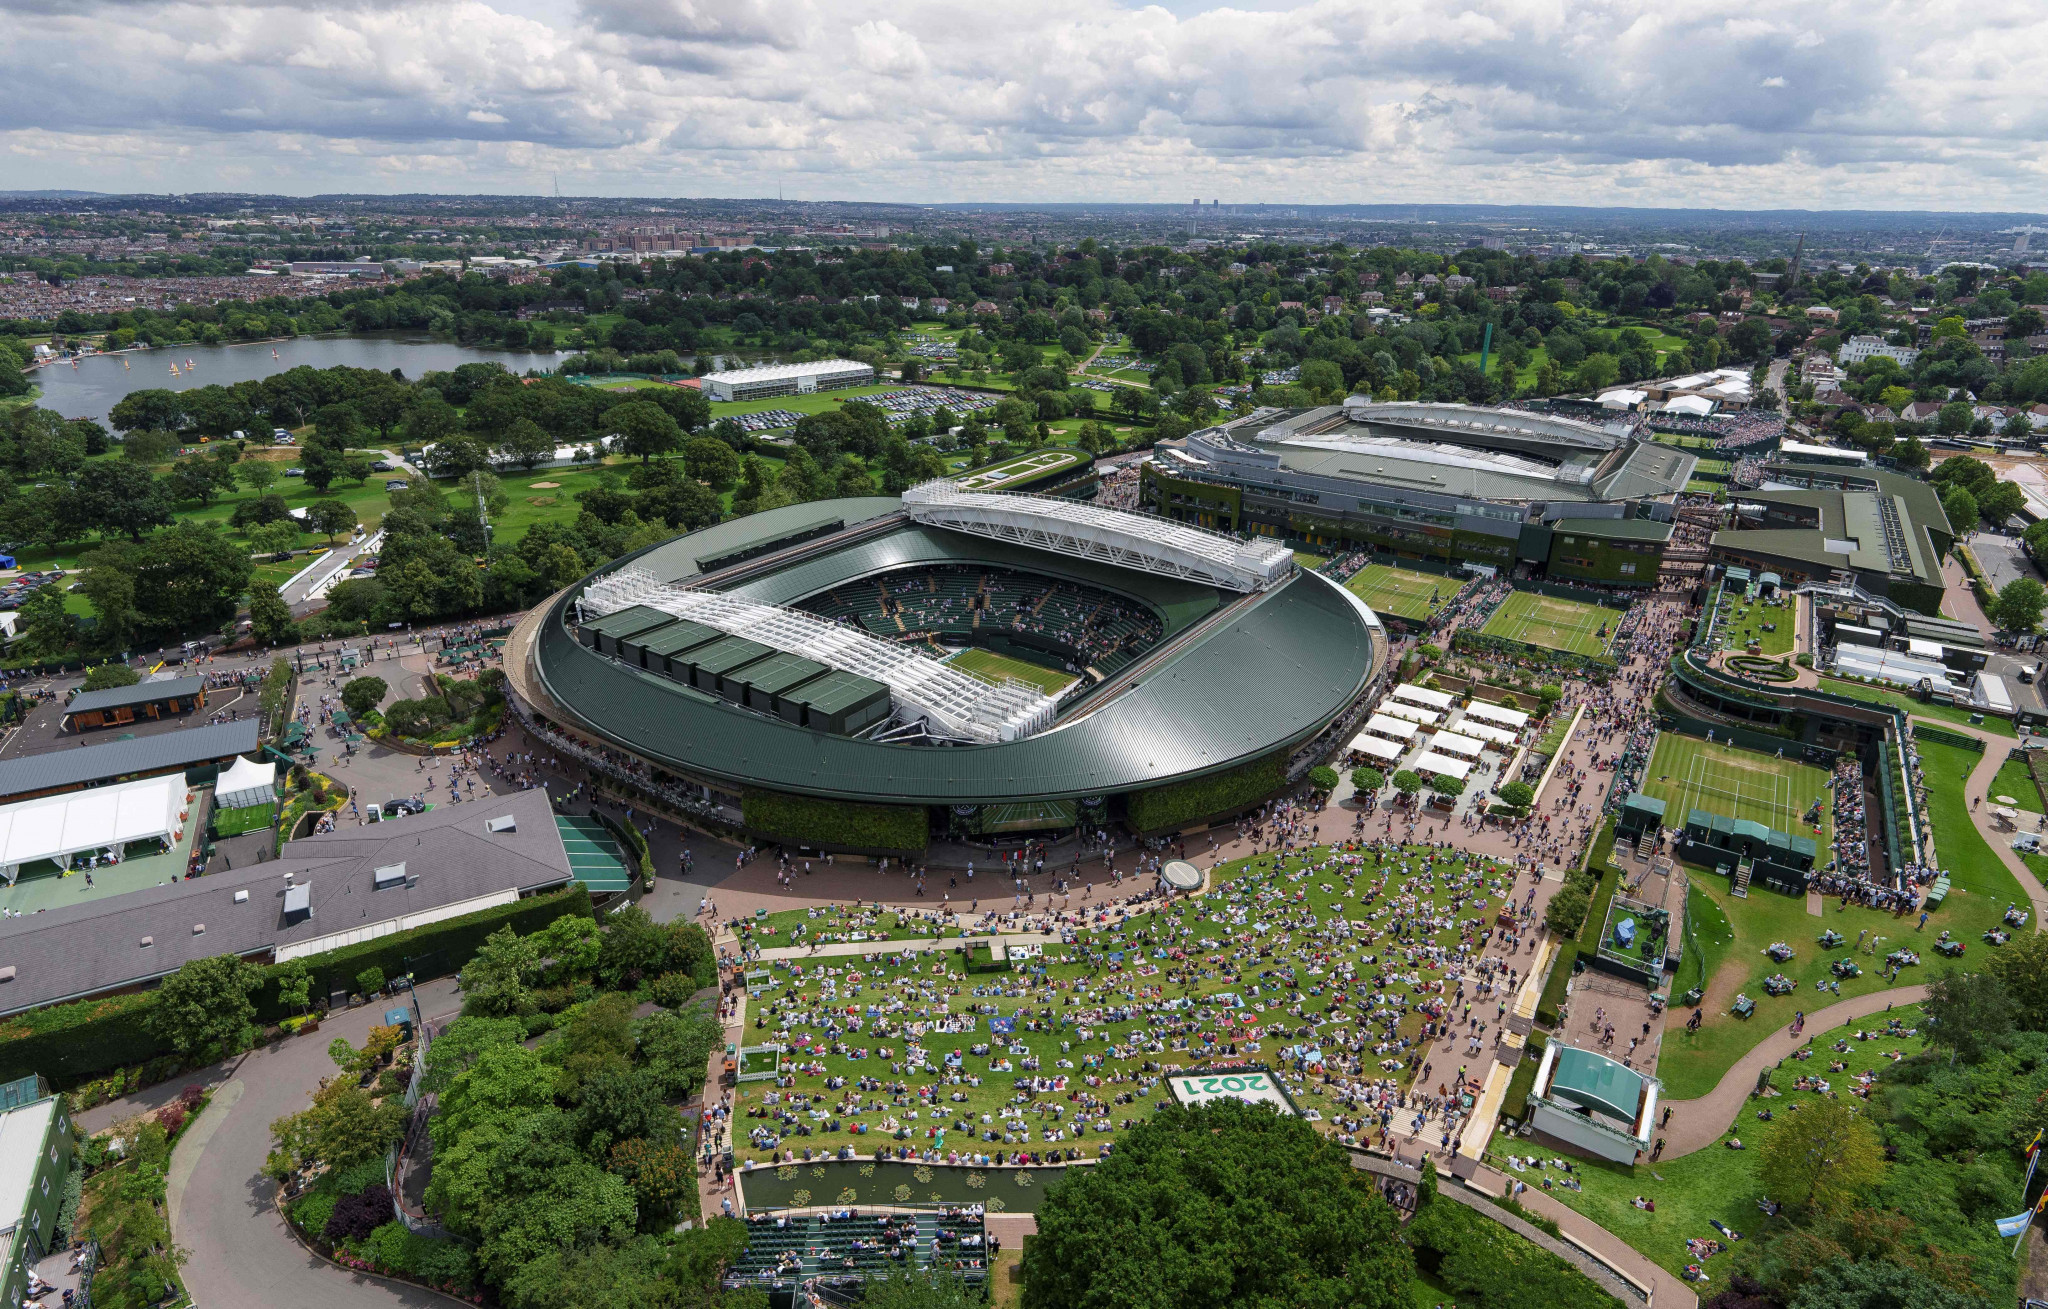 The All England Lawn Tennis Club announced its decision to ban Russian and Belarusian athletes from Wimbledon last month ©Getty Images